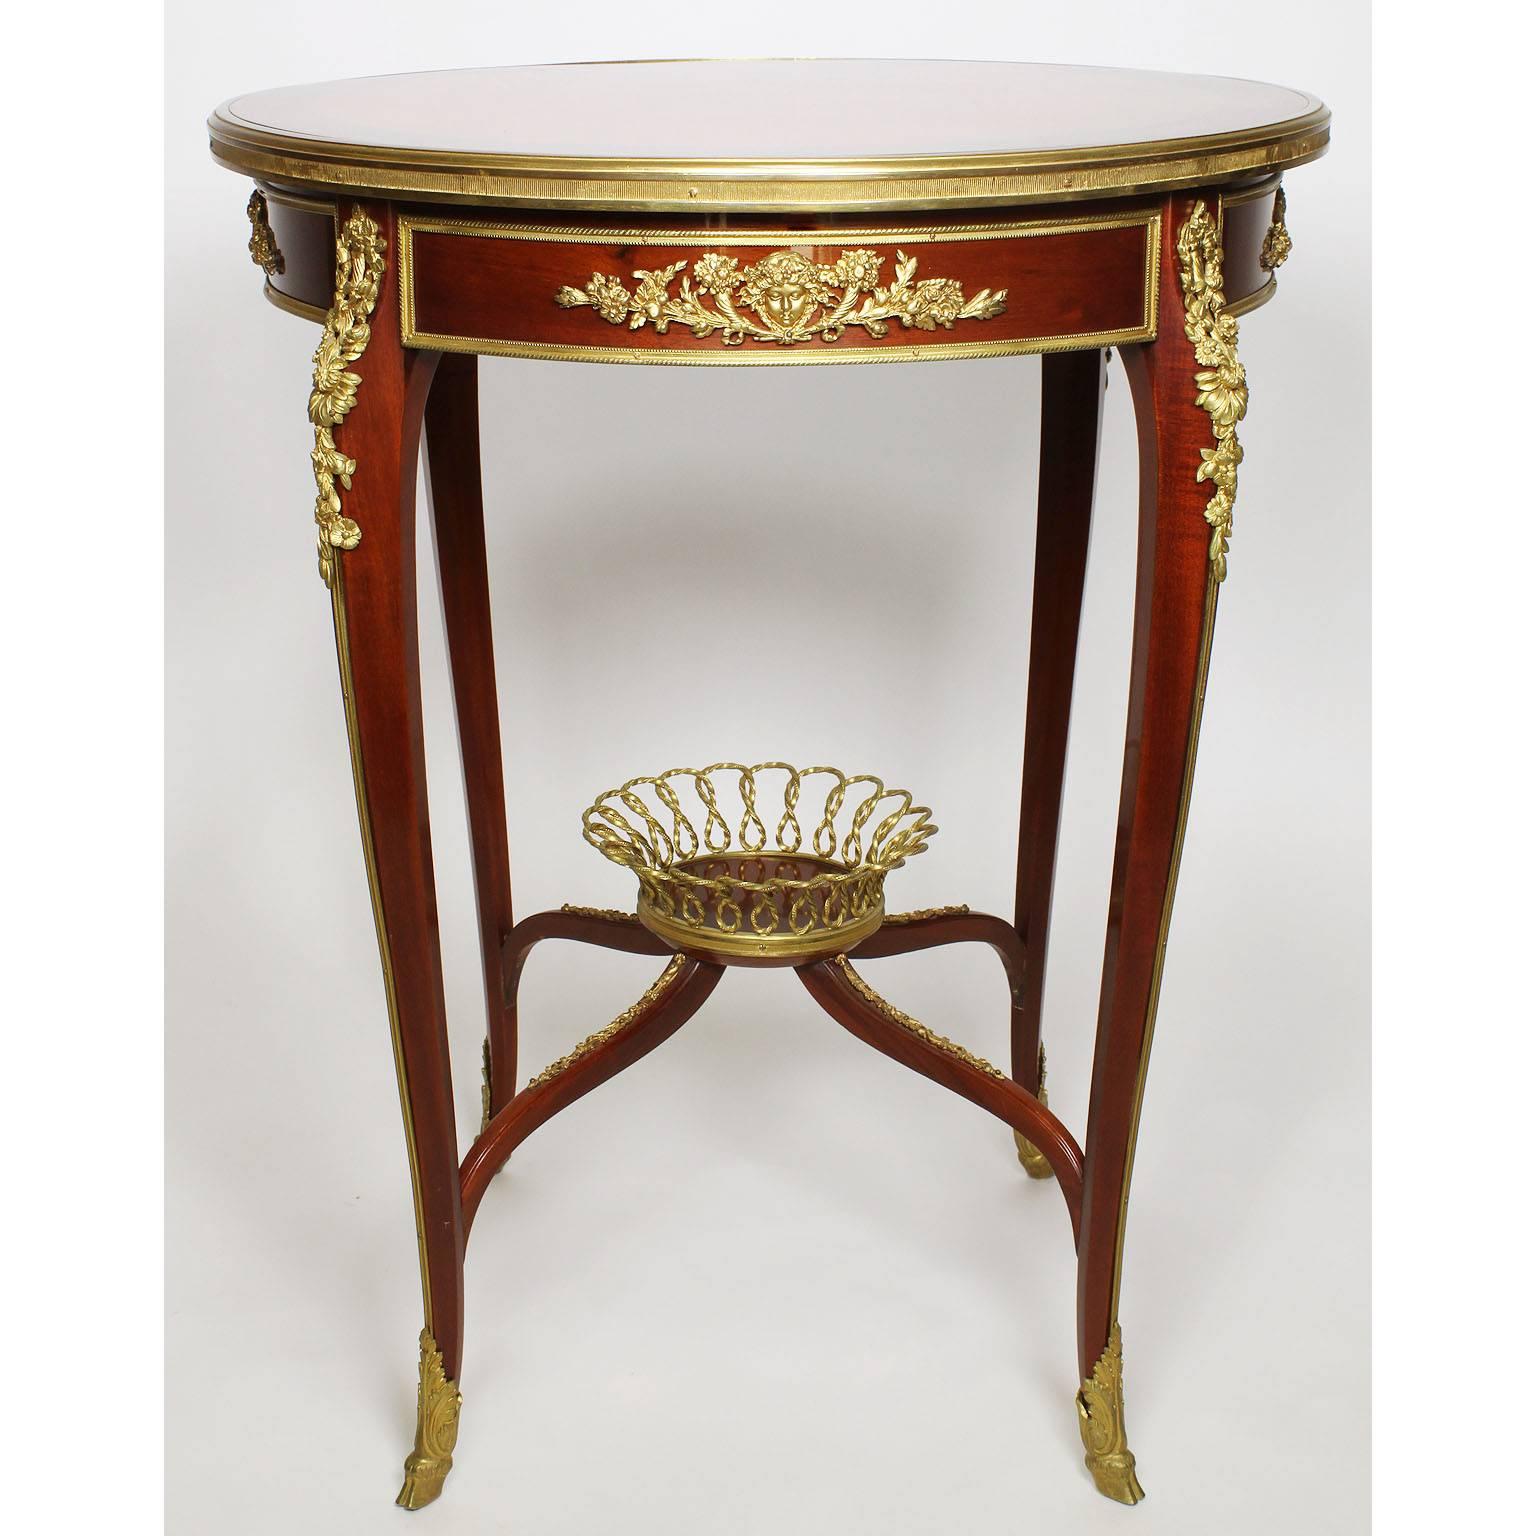 A fine French 19th-20th century Louis XV style gilt bronze-mounted mahogany and tulipwood marquetry gueridon side-table. The circular top inlaid with a floral design marquetry and symmetrical parquetry. The apron centered with ormolu mounts of